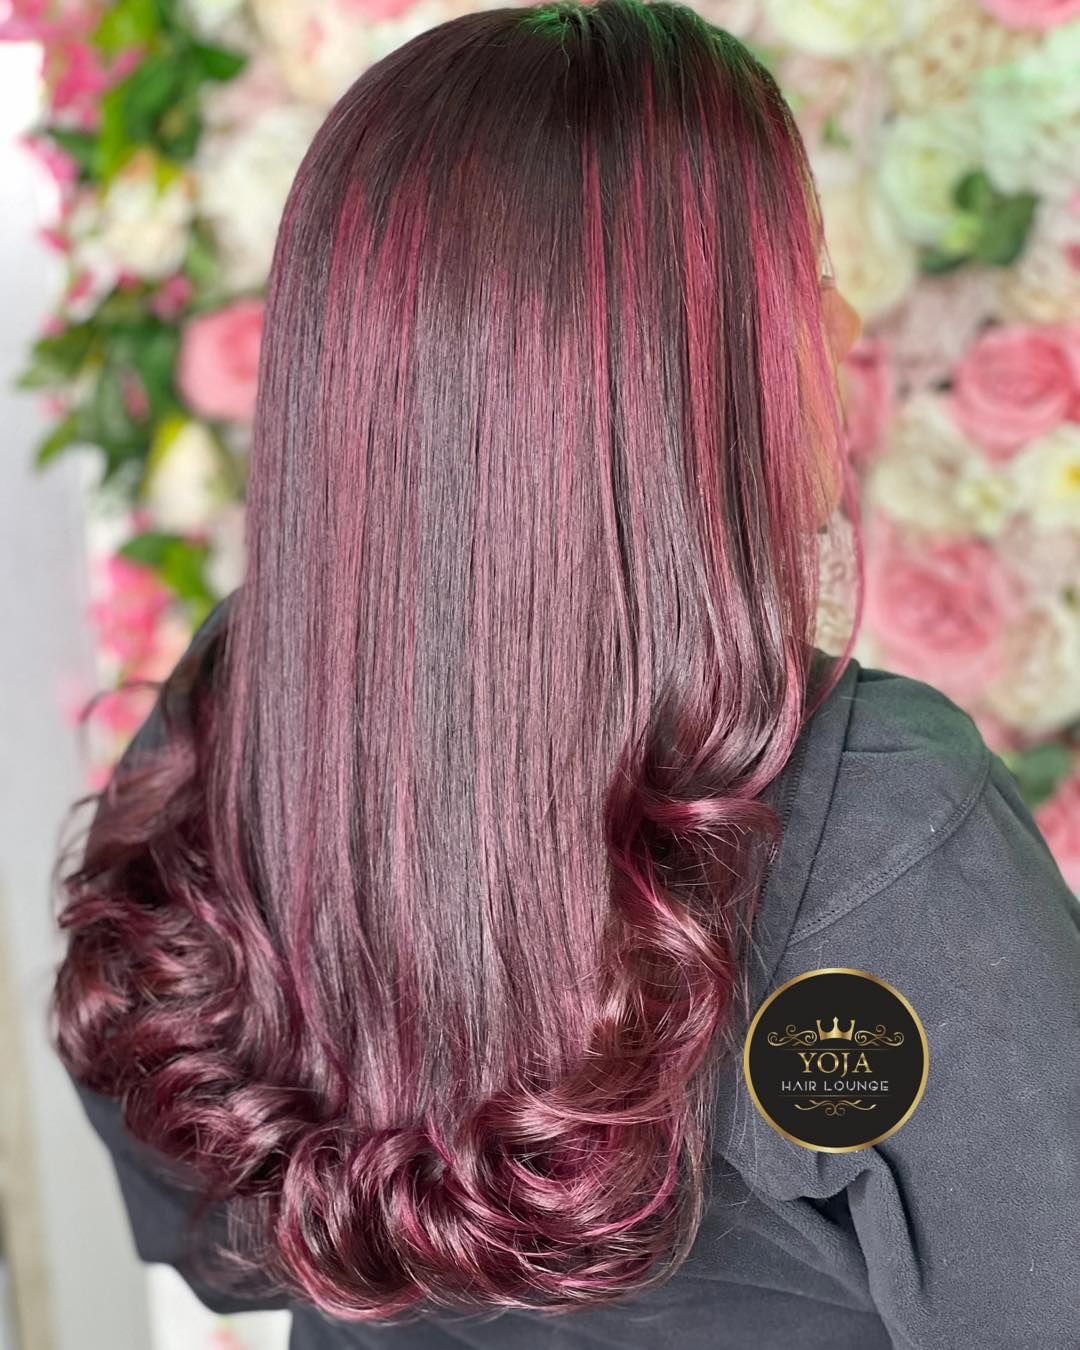 50 Best Burgundy Hair Color Ideas for 2023 - The Trend Spotter